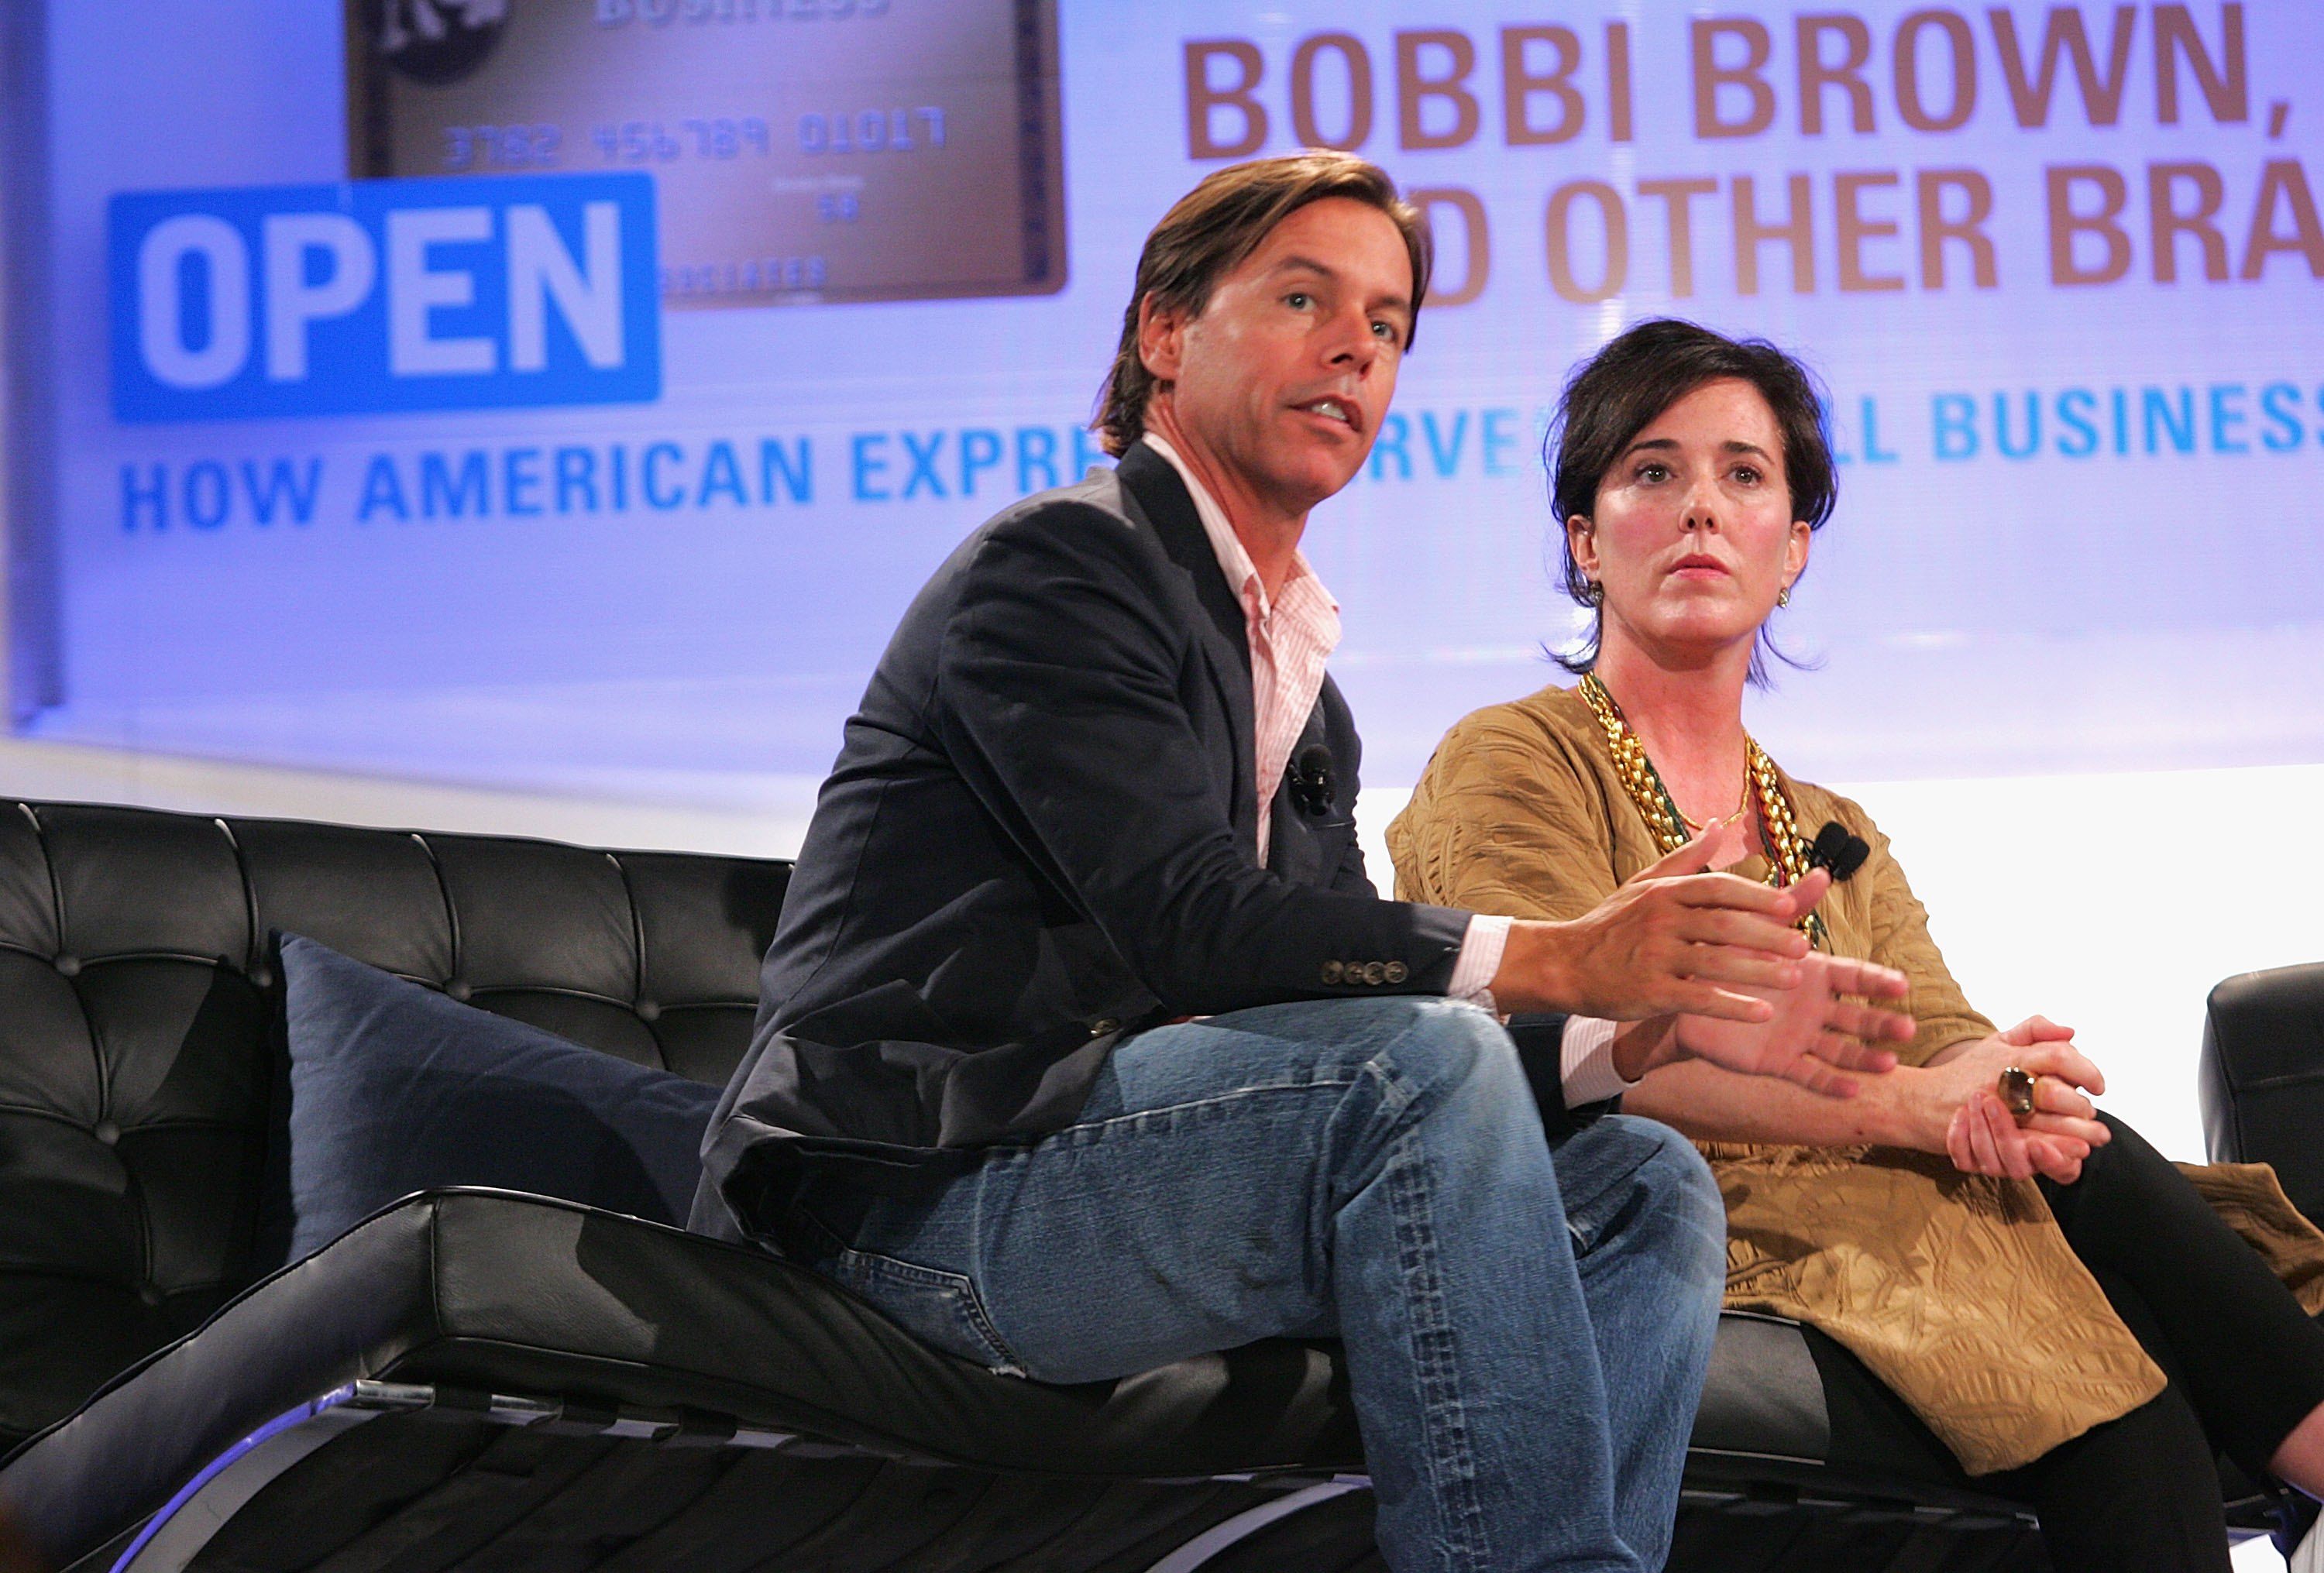 Andy Spade, CEO and Creative Director of Kate Spade, and designer Kate Spade attend OPEN from American Express' "Making a Name for Yourself" at Nokia Theater July 27, 2006 in New York City. 